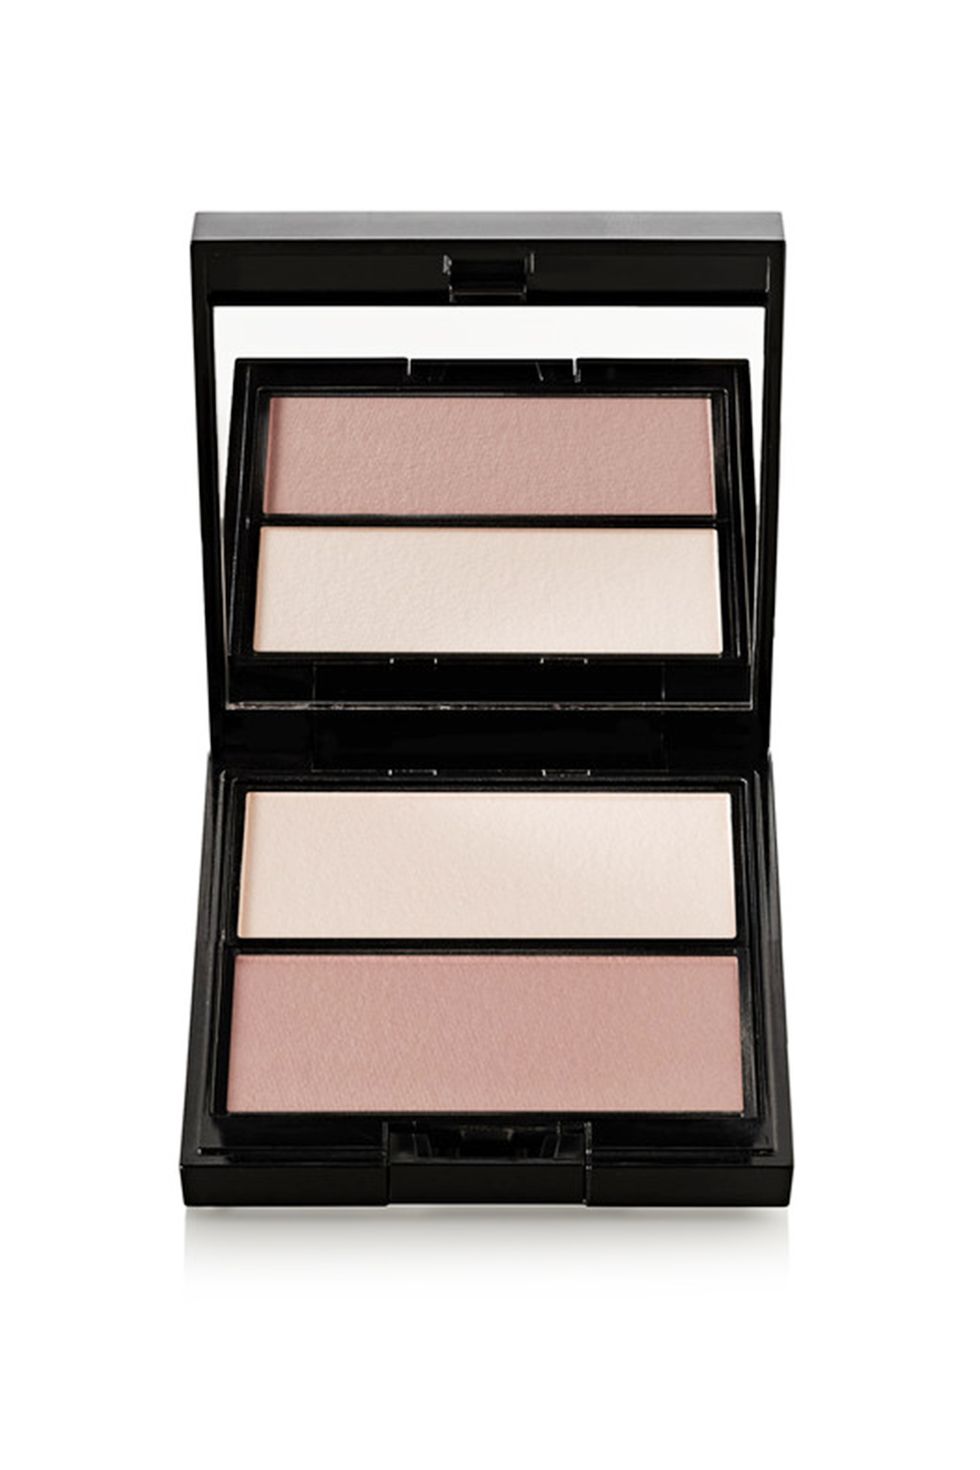 <p>Contouring isn't one size fits all which is why Pati Dubroff loves Surratt Beauty's Shadow &amp; Light Contour &amp; Highlight Palette. "I use foundations first to start building contour, using at least two to three shades and textures. Then when I reach for a powder contour palette it's from SURRATT; the contour is really soft and sheer and a great neutral tone."</p><p>Surratt Beauty Shadow &amp; Light Contour &amp; Highlight Palette, $81, <a href="https://www.net-a-porter.com/us/en/product/579455/surratt_beauty/shadow---light-contour---highlight-palette"><u data-redactor-tag="u">Net-a-porter.com</u></a></p>